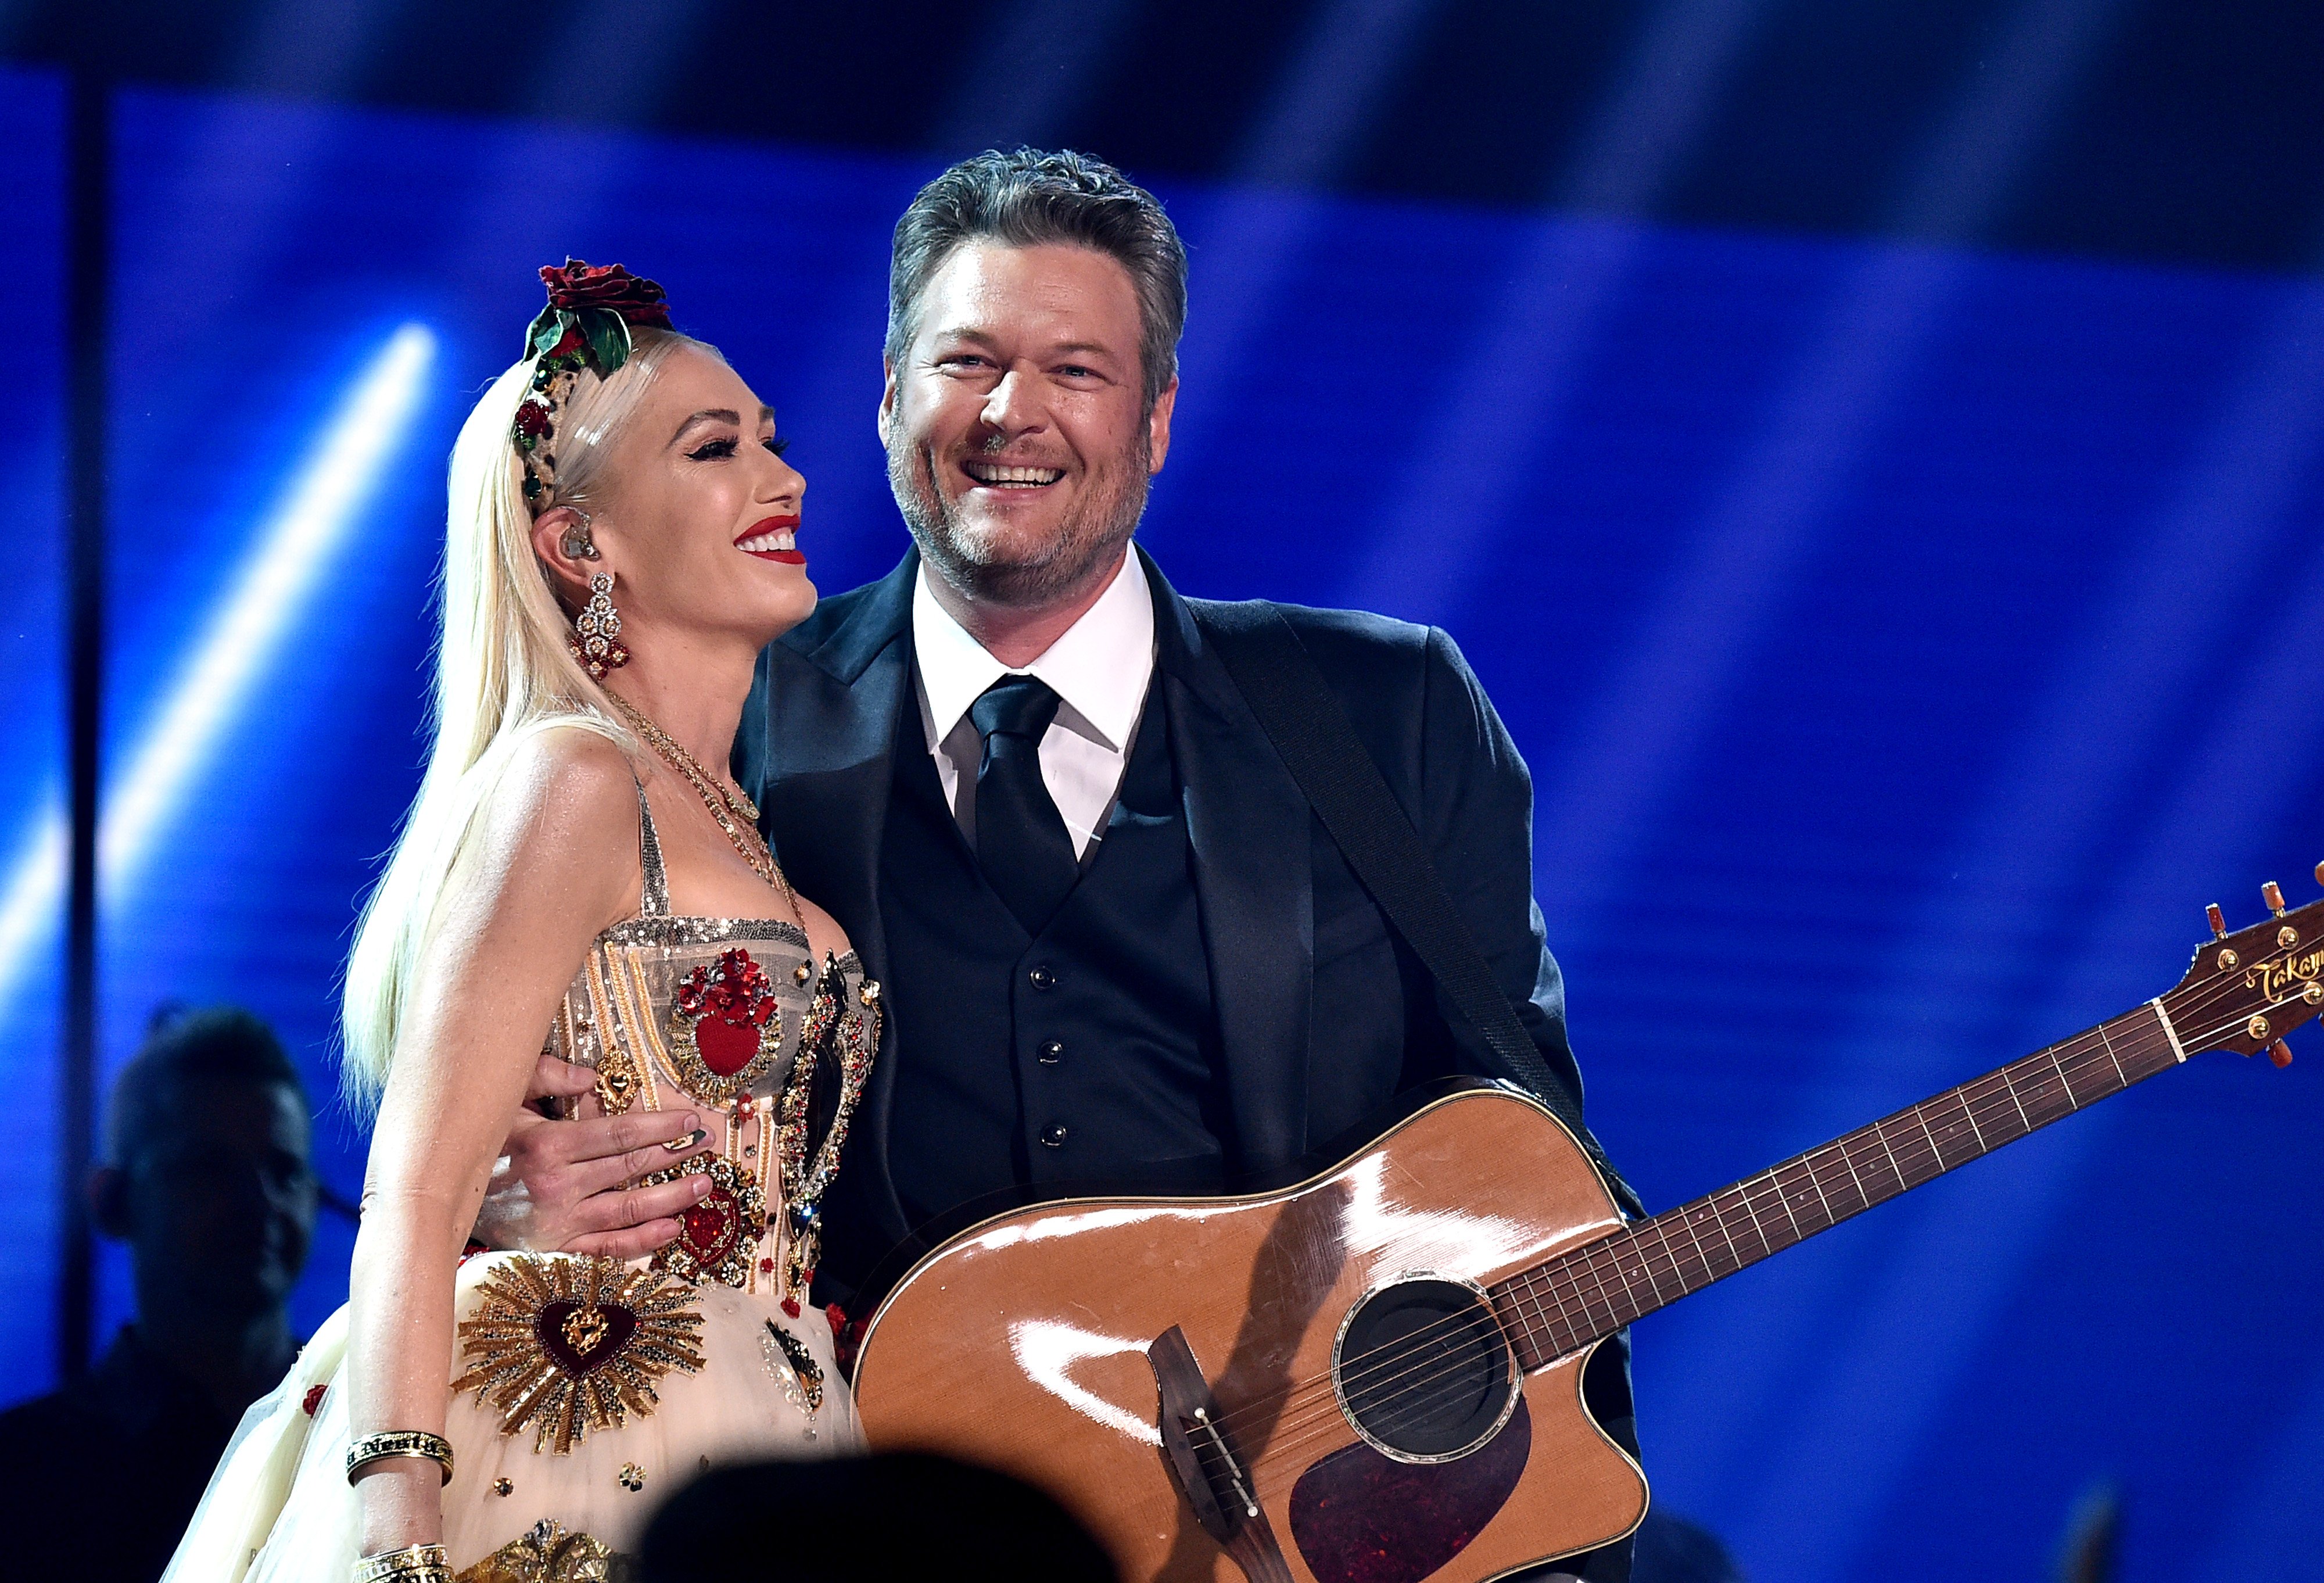 Gwen Stefani and Blake Shelton perform at the 62nd Annual GRAMMY Awards on January 26, 2020, in Los Angeles, California. | Source: Getty Images.